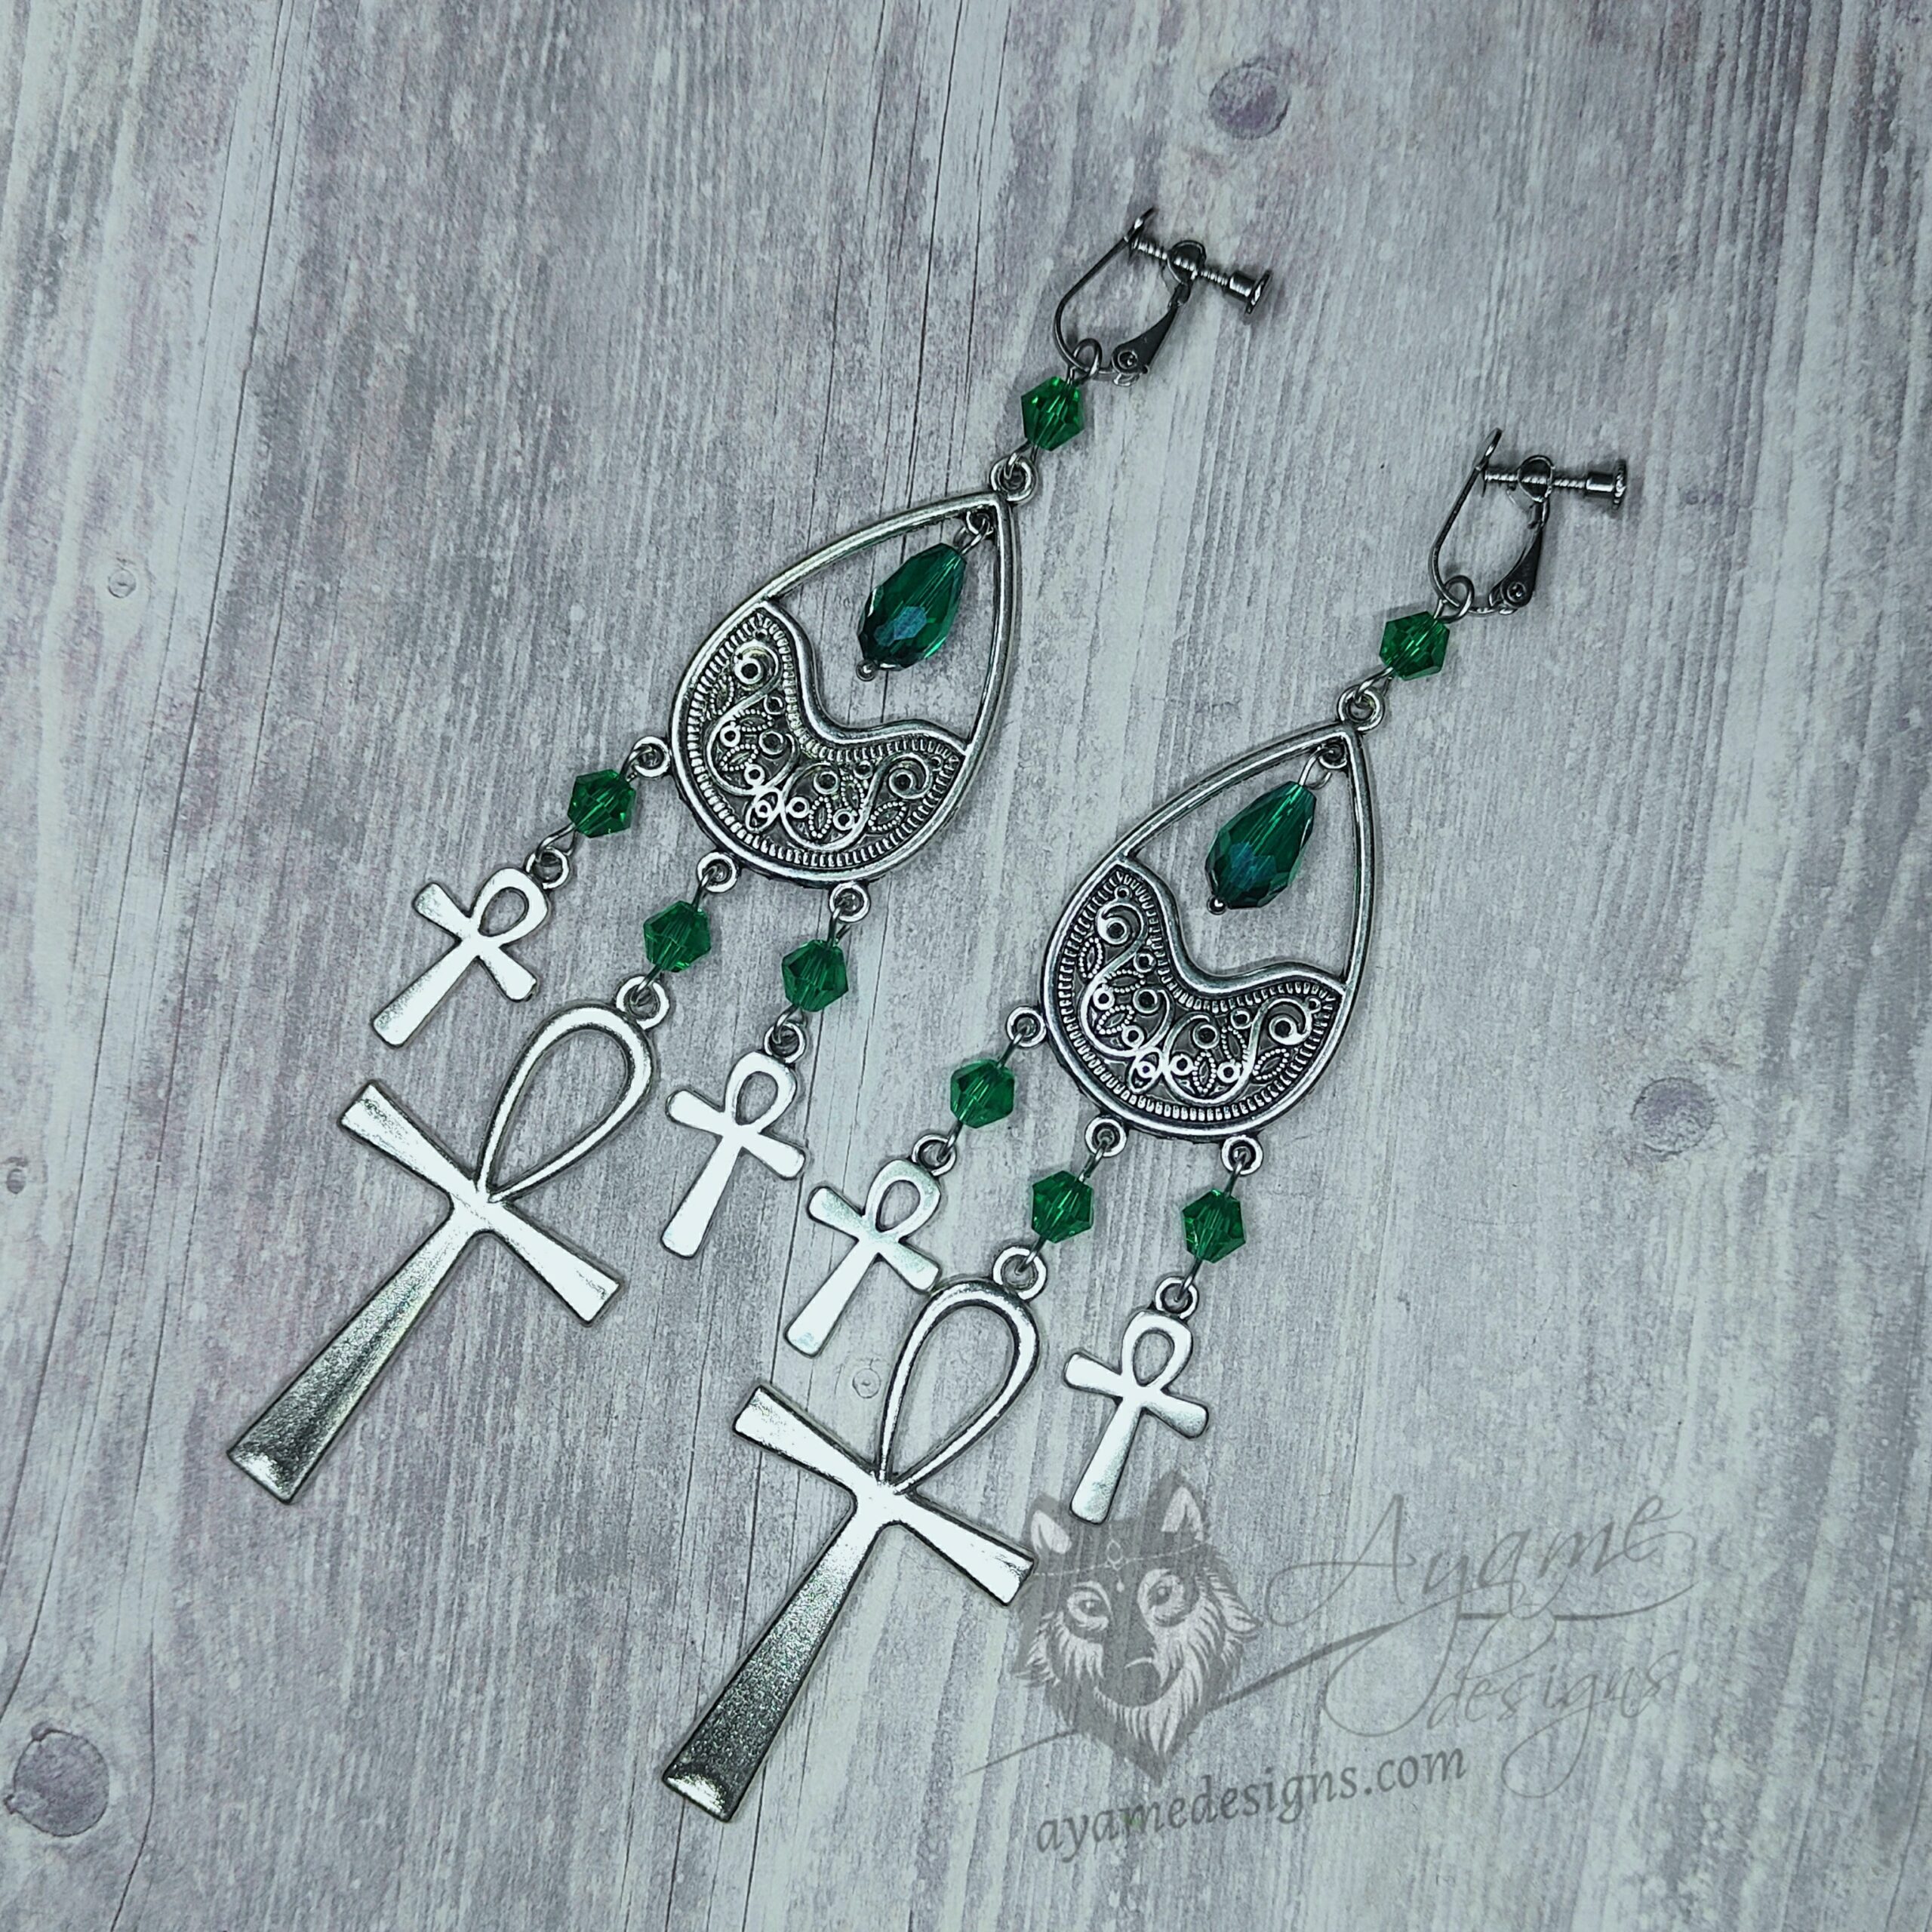 Handmade gothic earrings with filigree and ankh charms, teal green Austrian crystal beads and stainless steel clip-on earrings